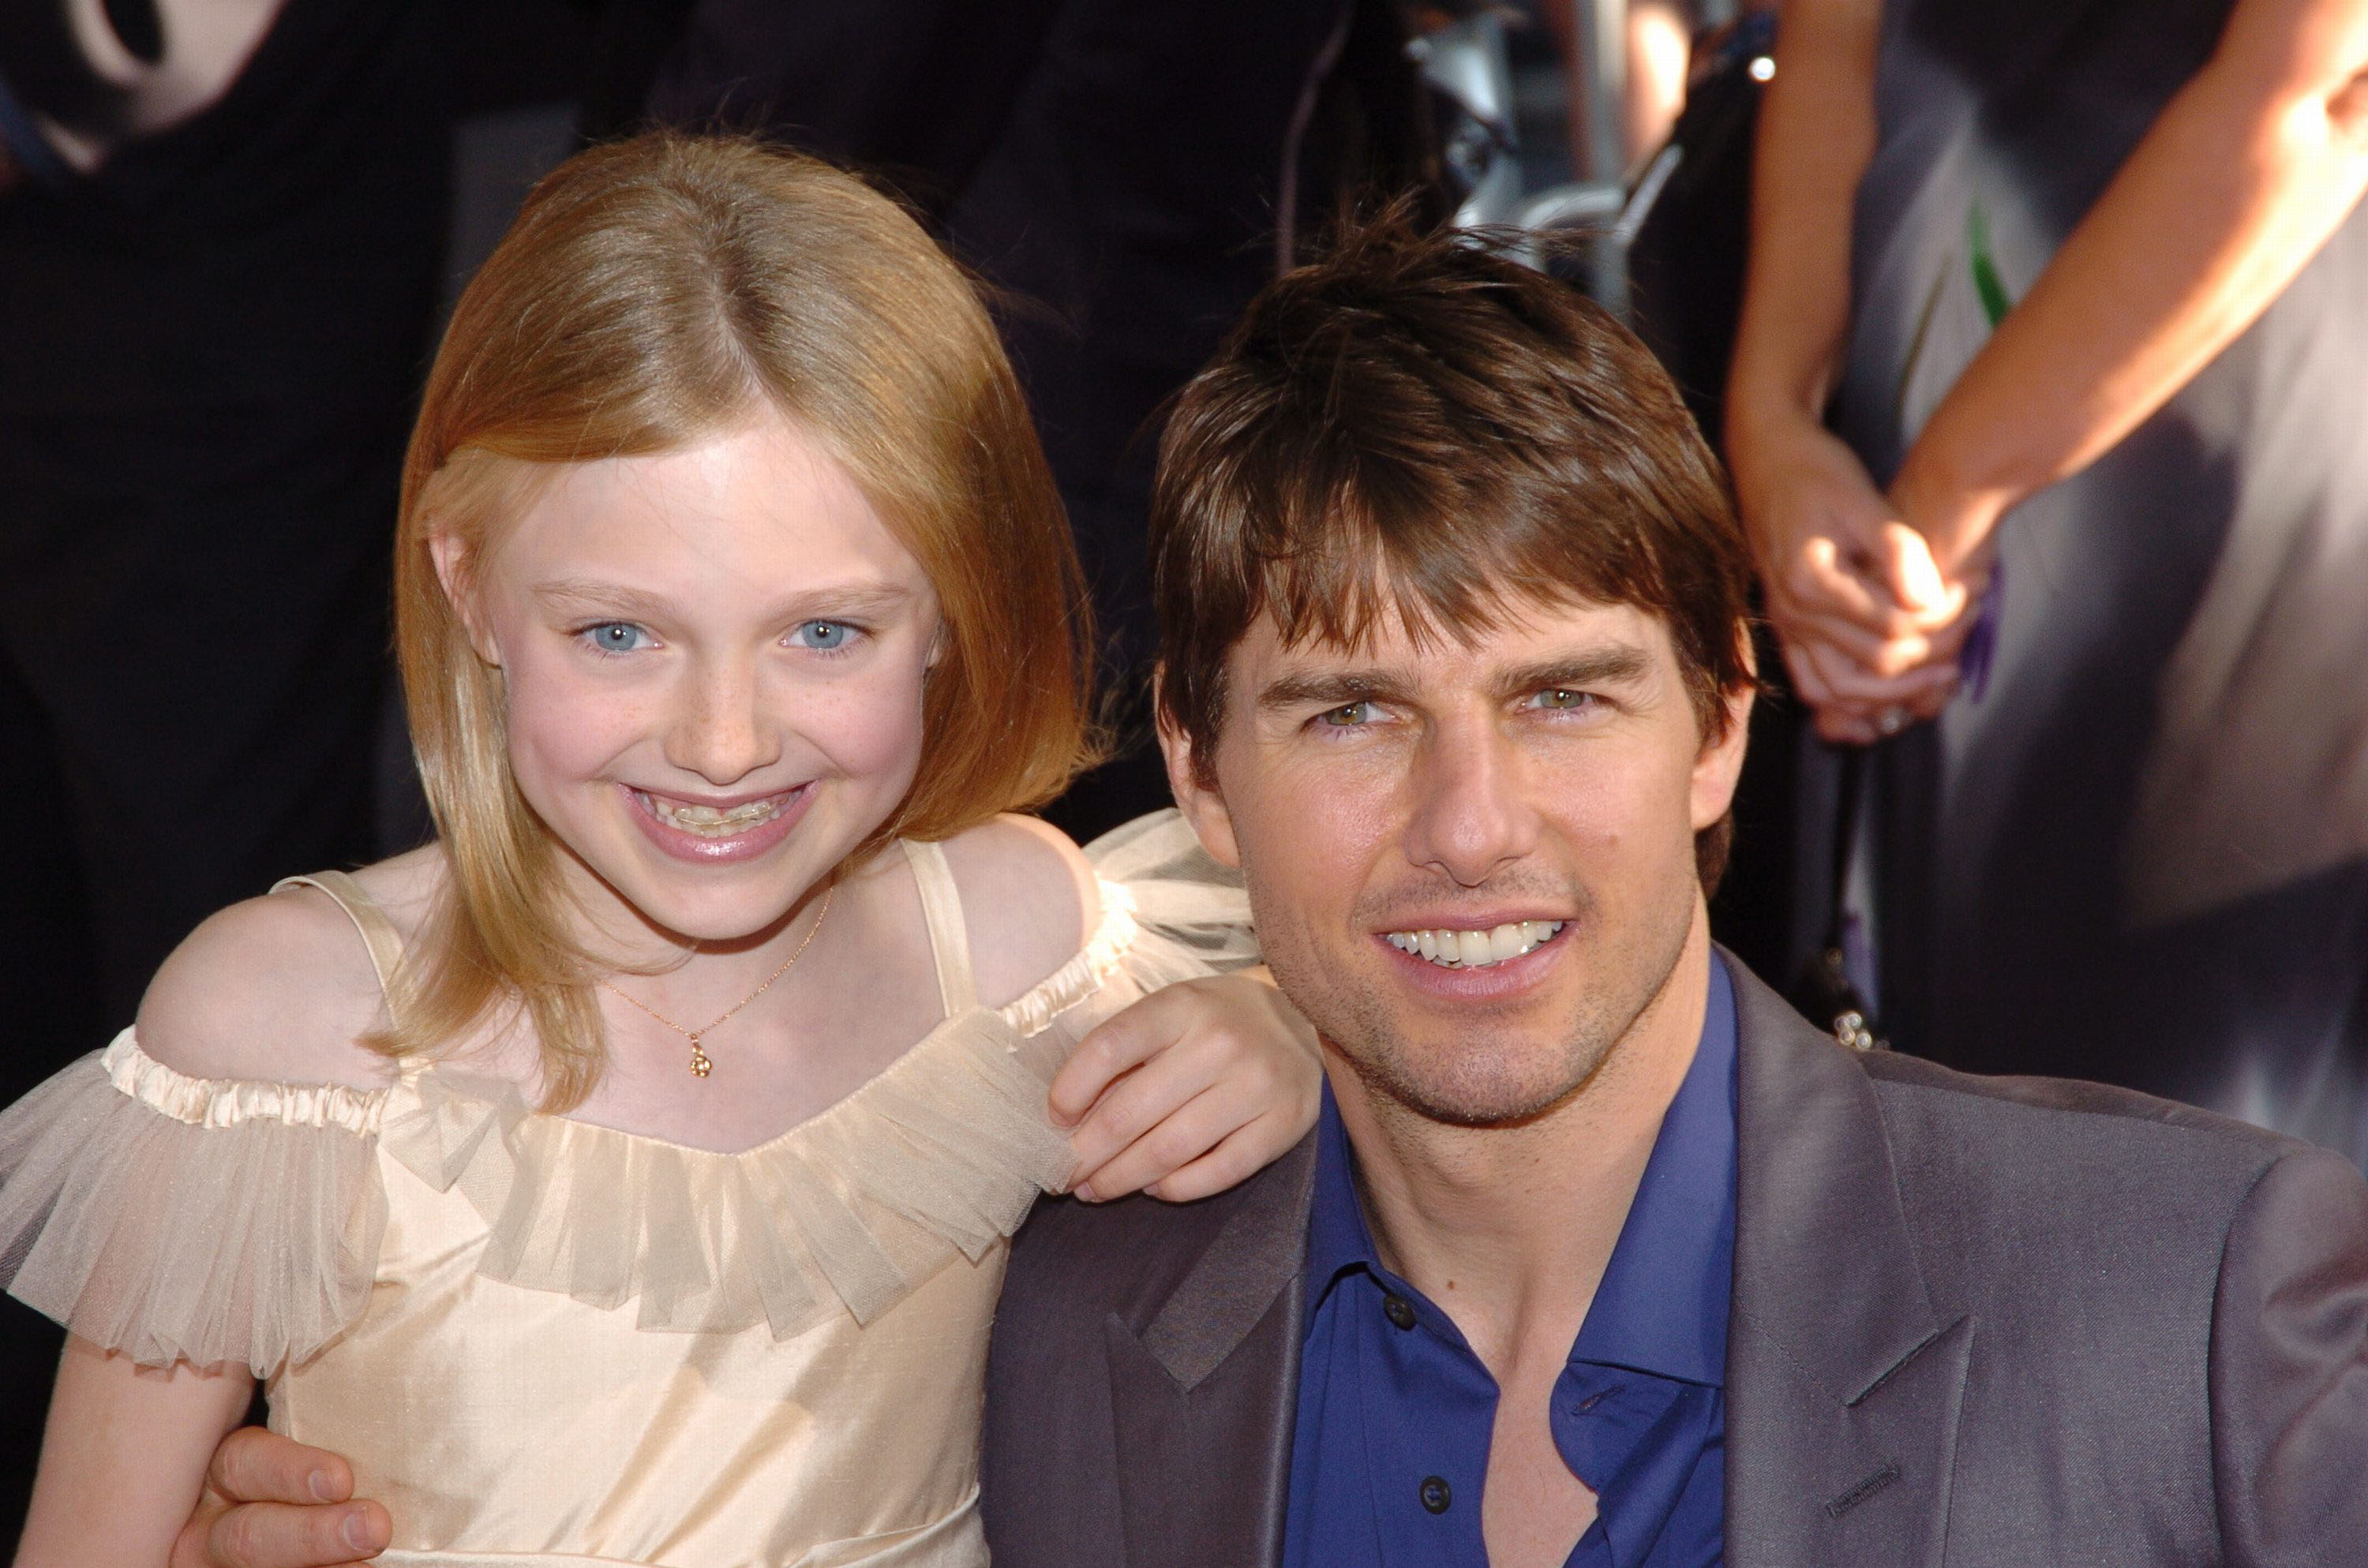 Tom Cruise and Dakota Flanning attend the "War Of The Worlds" premiere on June 23, 2005 in New York City | Source: Getty Images